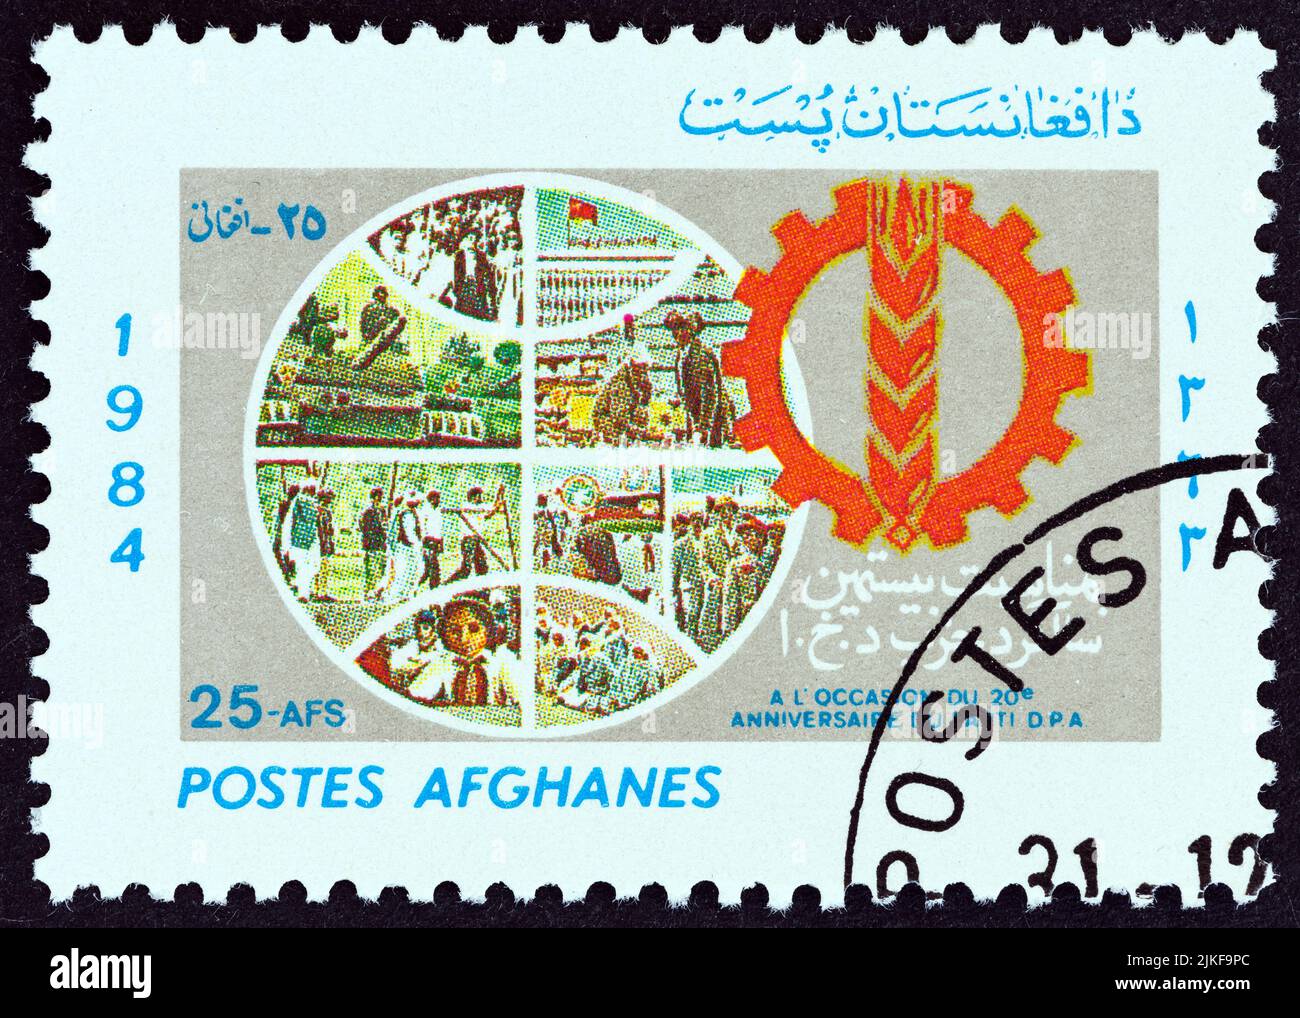 AFGHANISTAN - CIRCA 1985: A stamp printed in Afghanistan issued for the 20th Anniversary of the People's Democratic Party shows Globe and Emblem. Stock Photo